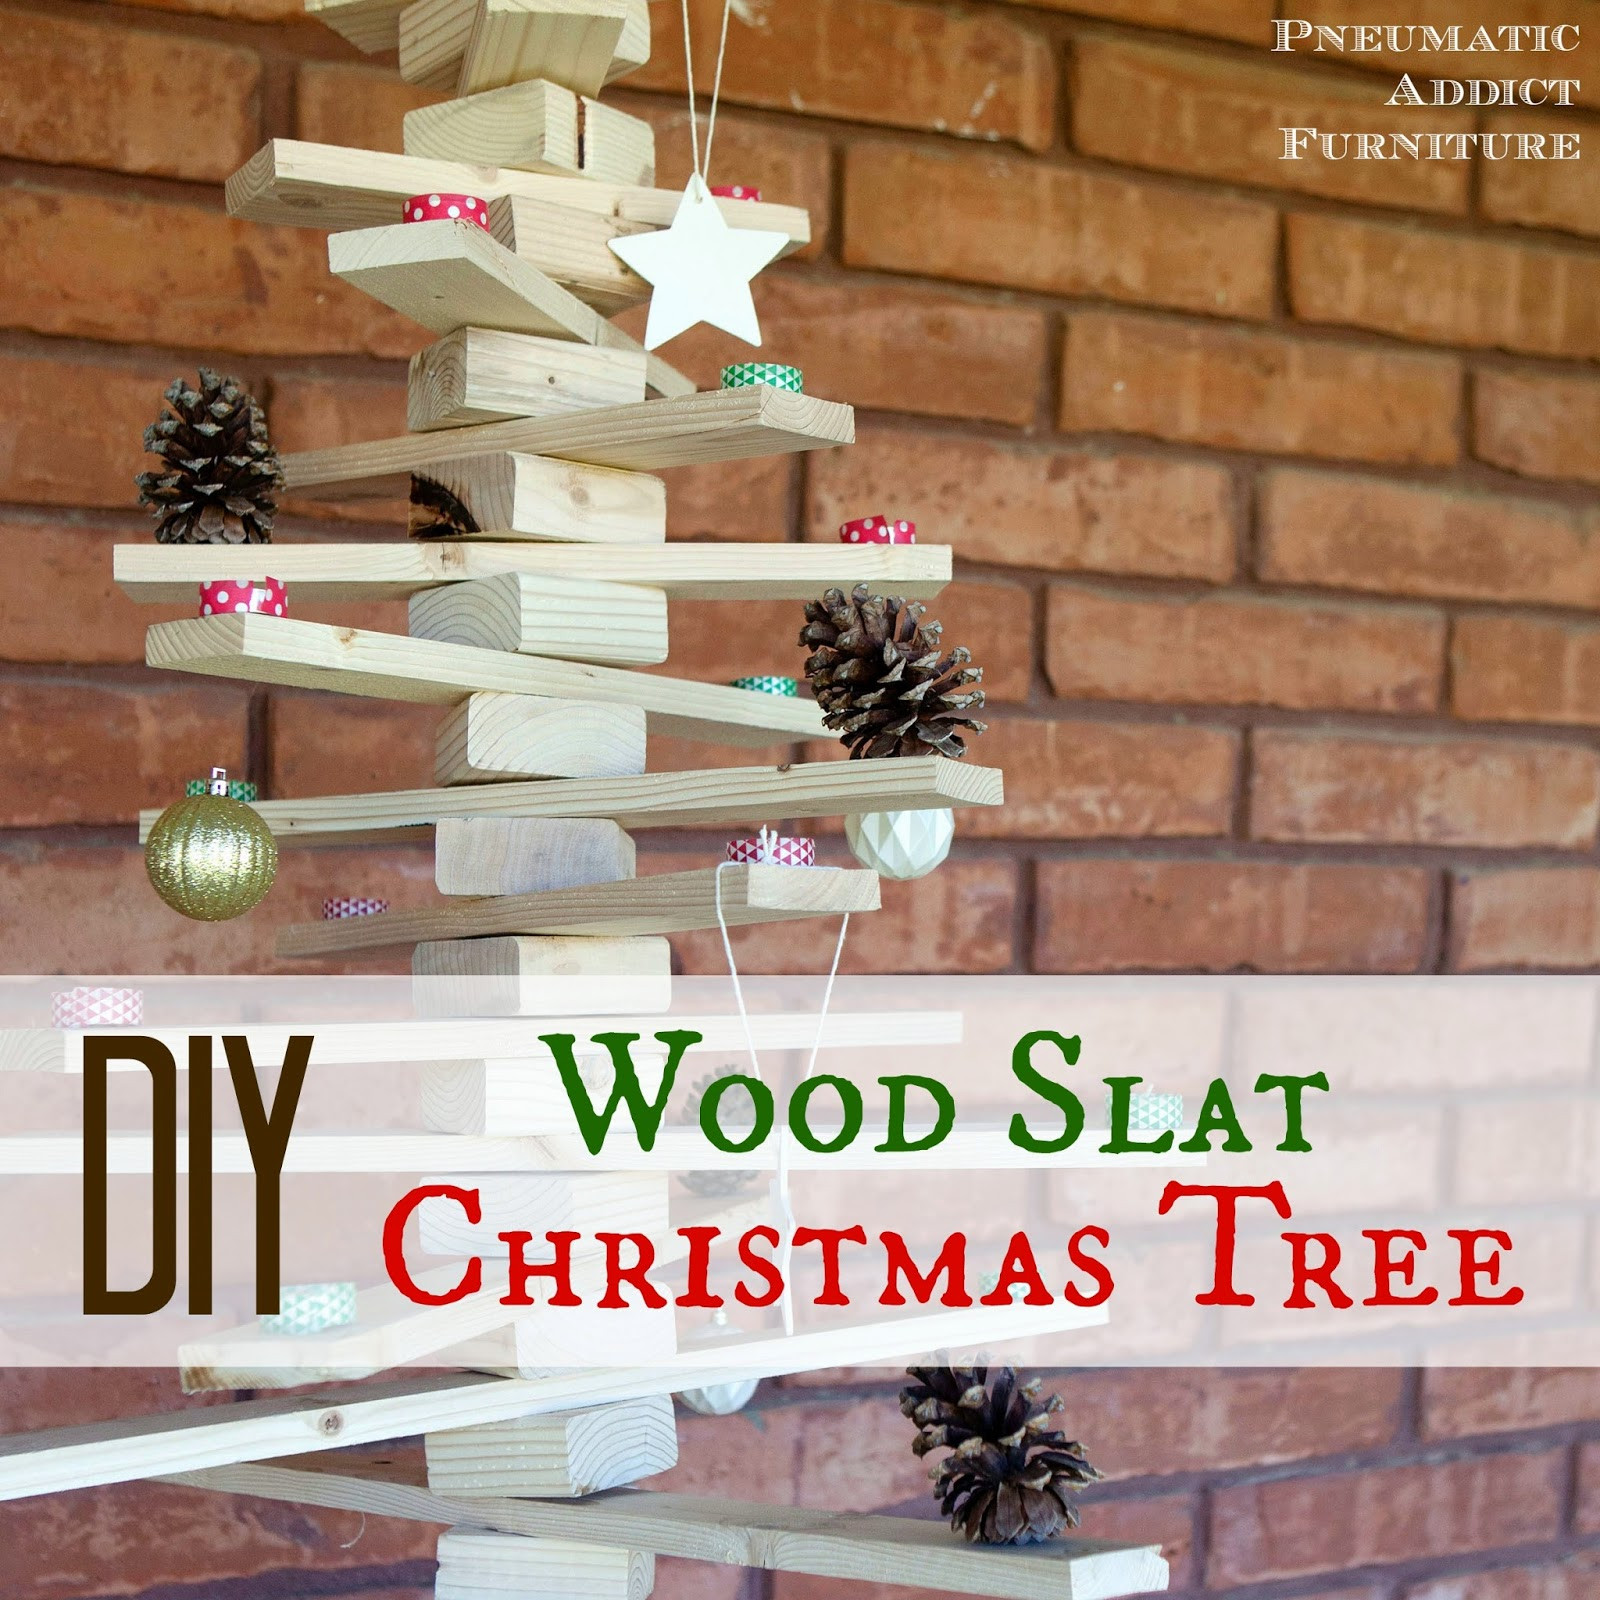 Best ideas about DIY Wood Christmas Trees
. Save or Pin DIY Wood Slat Christmas Tree Now.